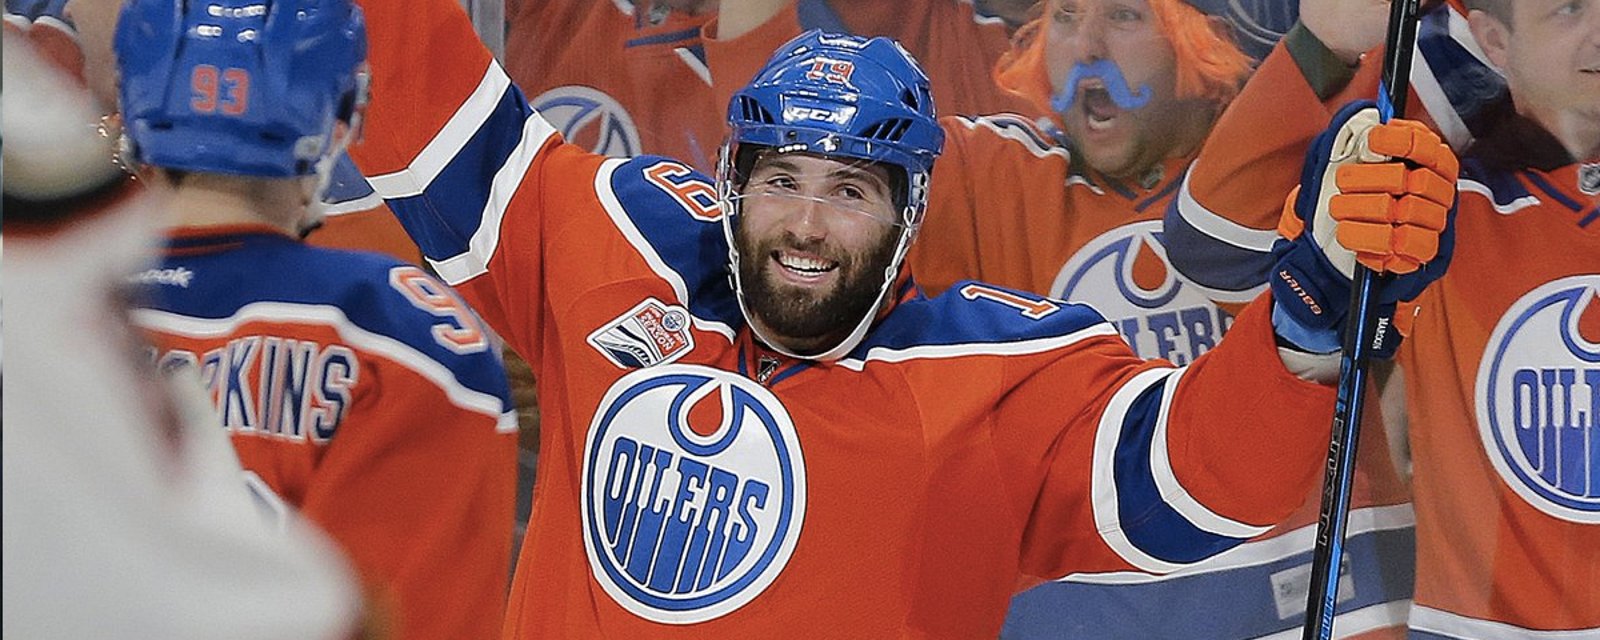 Rumor: Oilers' power forward “most likely” to get traded